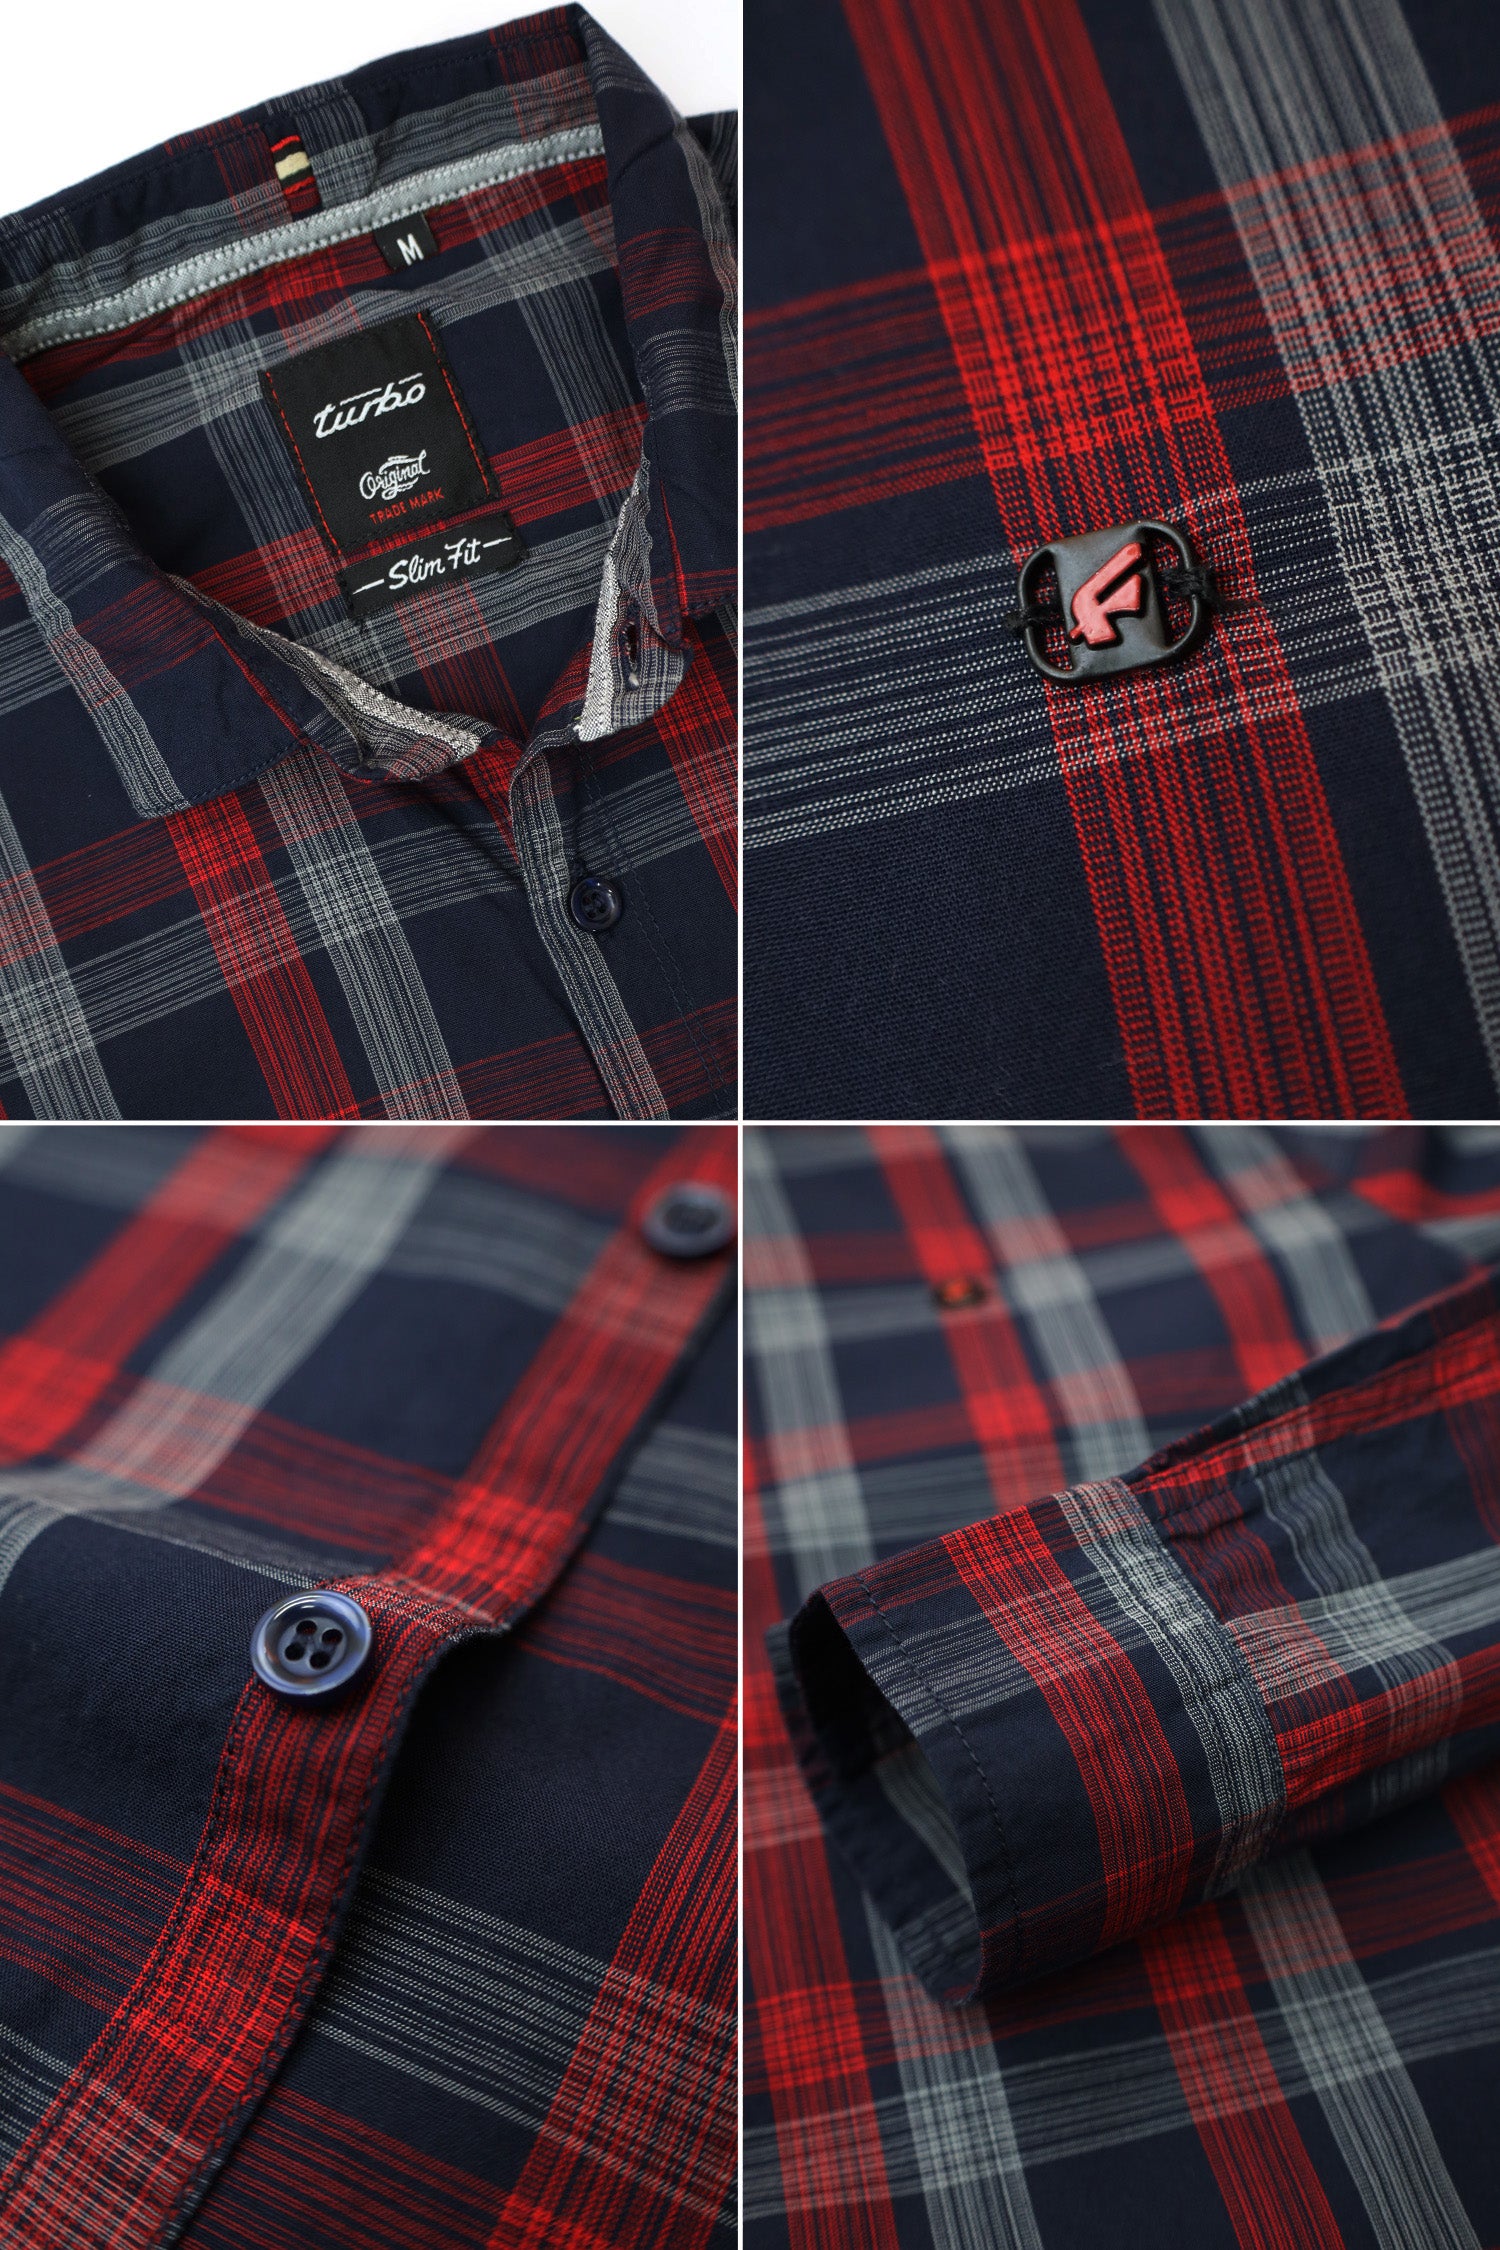 Double Check Design Full Sleeve Casual Shirt